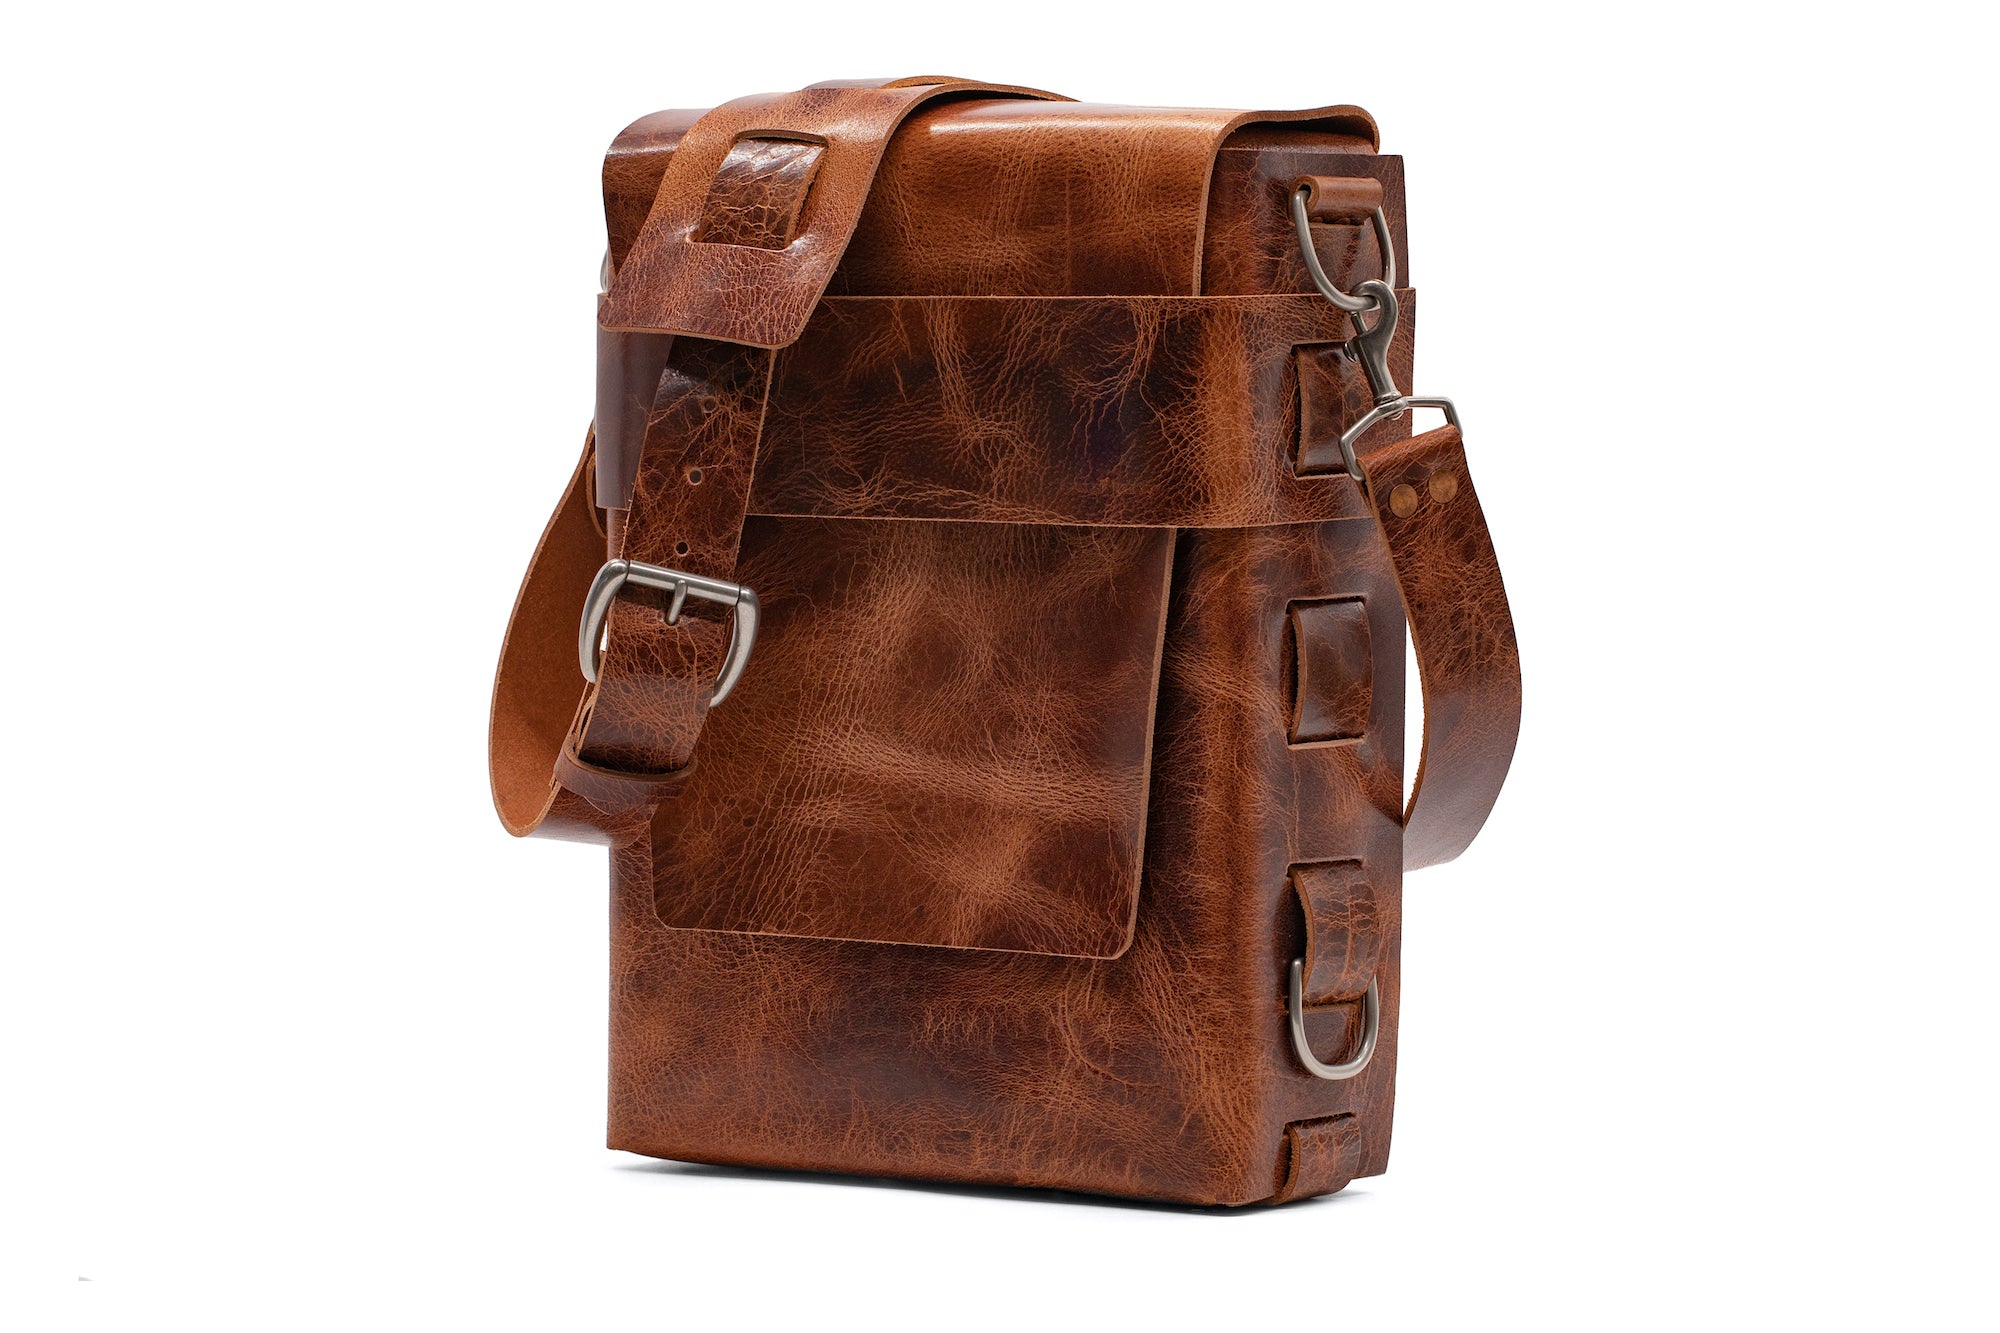  Exception Goods Man Purse Crossbody Leather, Mens Shoulder Bag  Leather Messenger Bag For Men : Clothing, Shoes & Jewelry